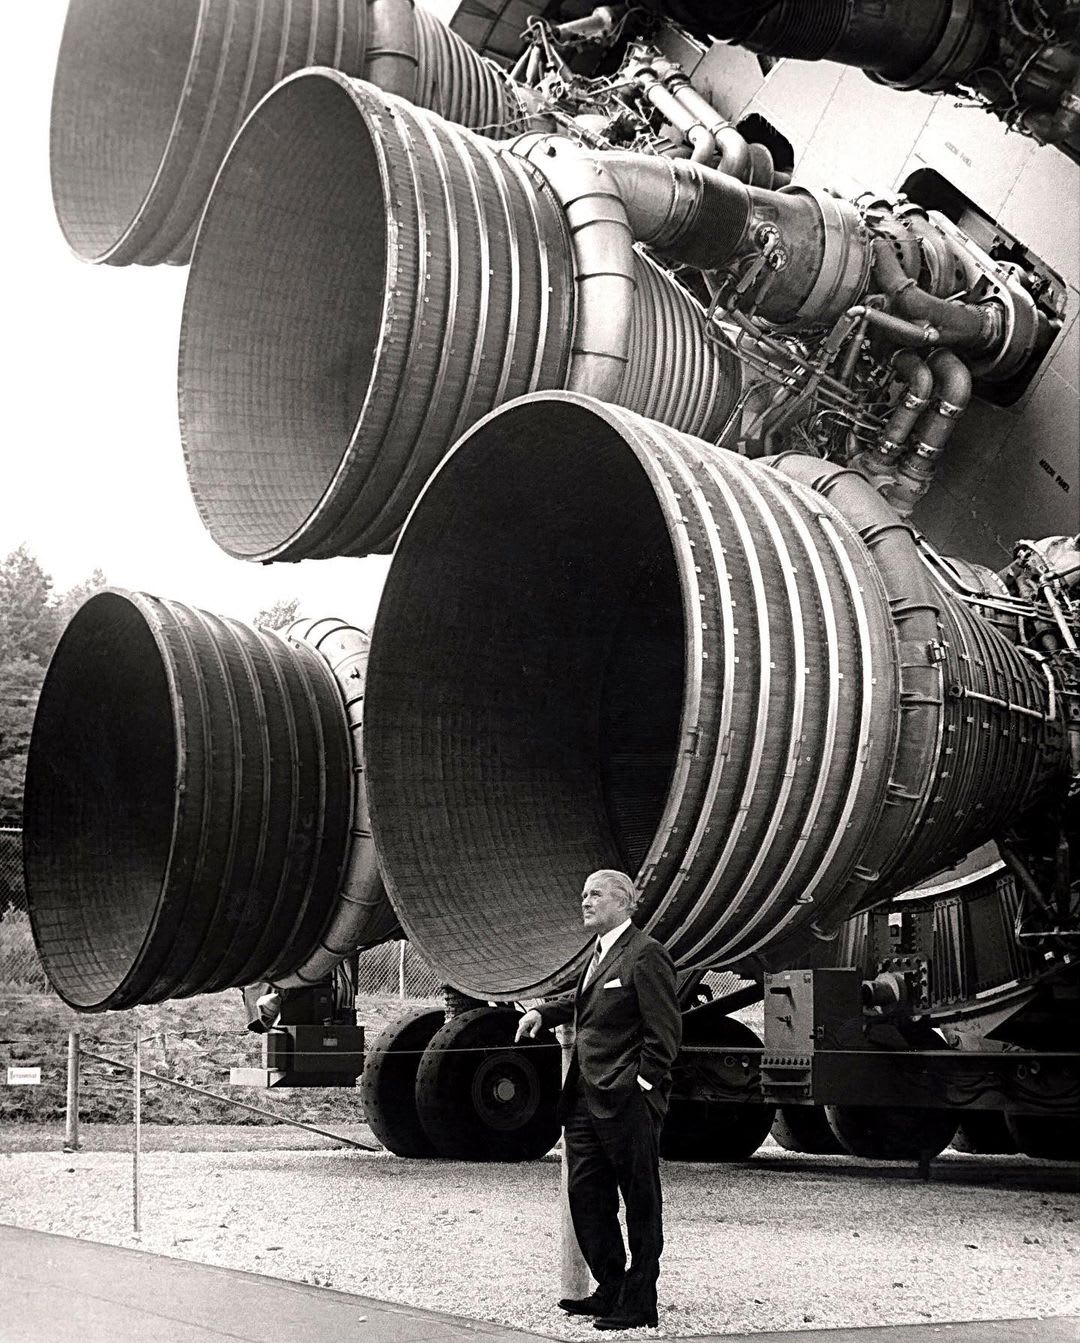 Aerospace engineer Werner von Braun with the enormous F-1 booster rockets of the Saturn V at the Kennedy Space Center in 1967.